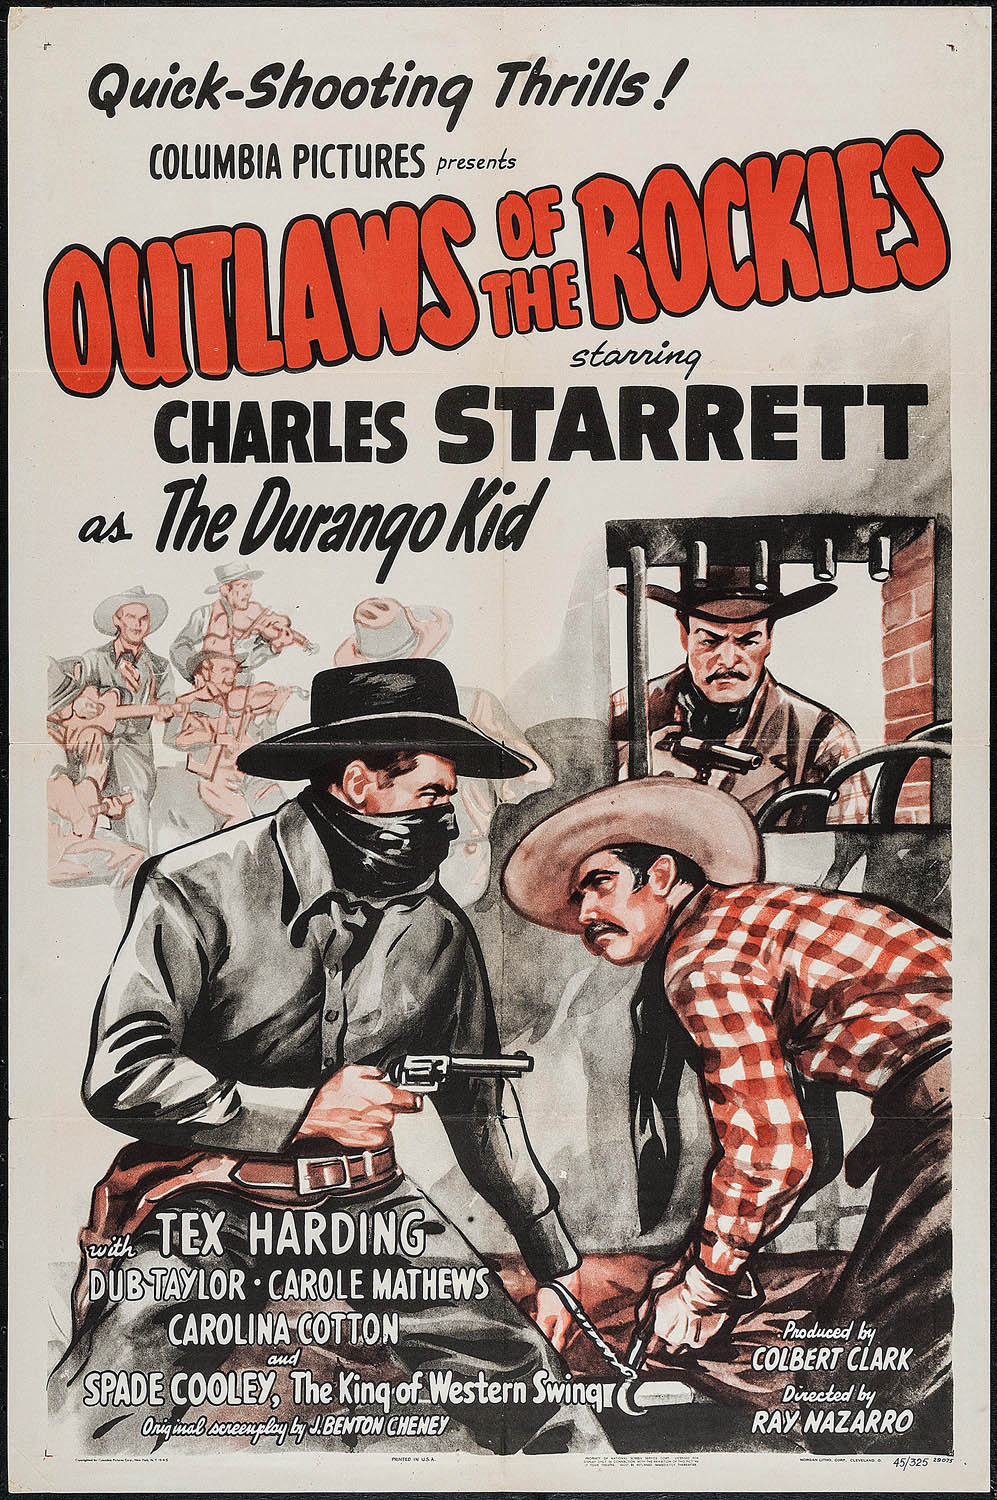 OUTLAWS OF THE ROCKIES